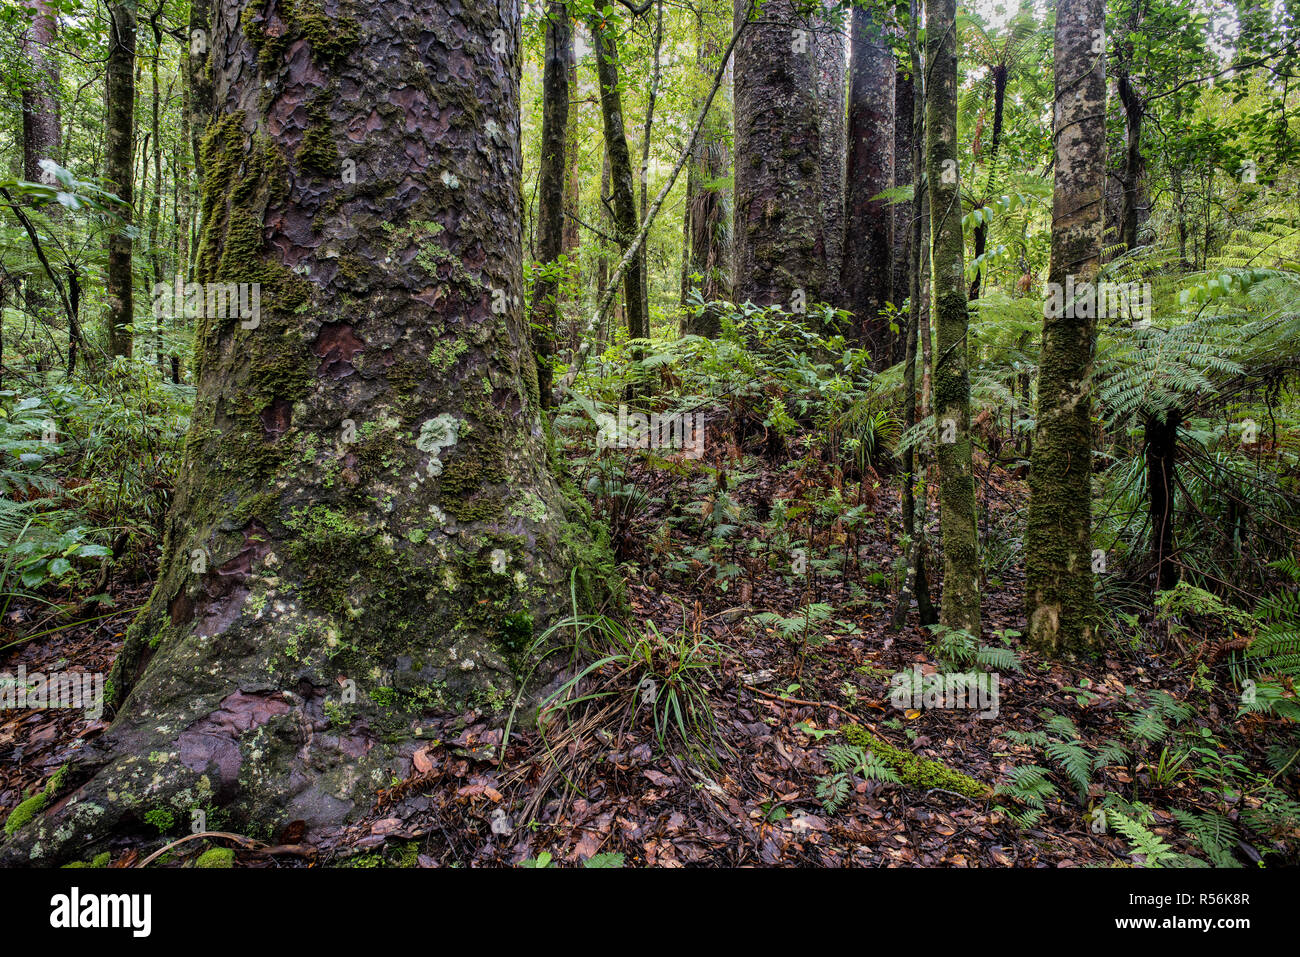 Old-growth forest of New Zealand kauri trees (Agathis australis), ferns, and bromeliads in the Waipoua Forest in Northland, New Zealand. Kauri trees a Stock Photo